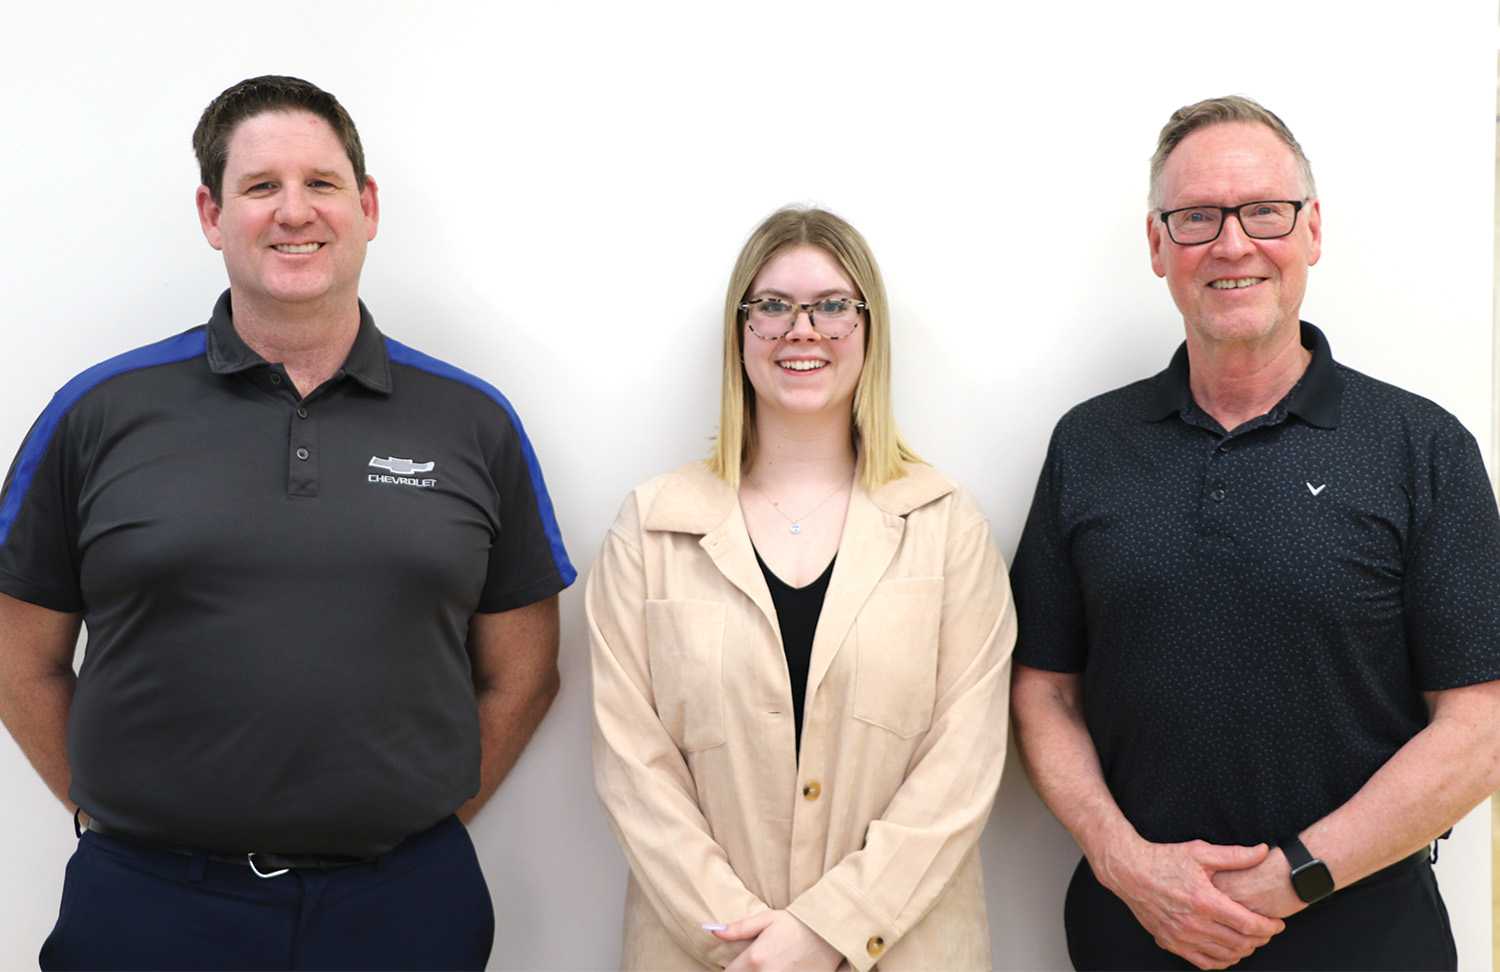 From left, Murray Gray, the chair of Moosomin’s Economic Development Committee,  Casey McCormac, Moosomin’s new Economic Development Officer, and Greg Gillespie,  who is leaving his position as EDO.